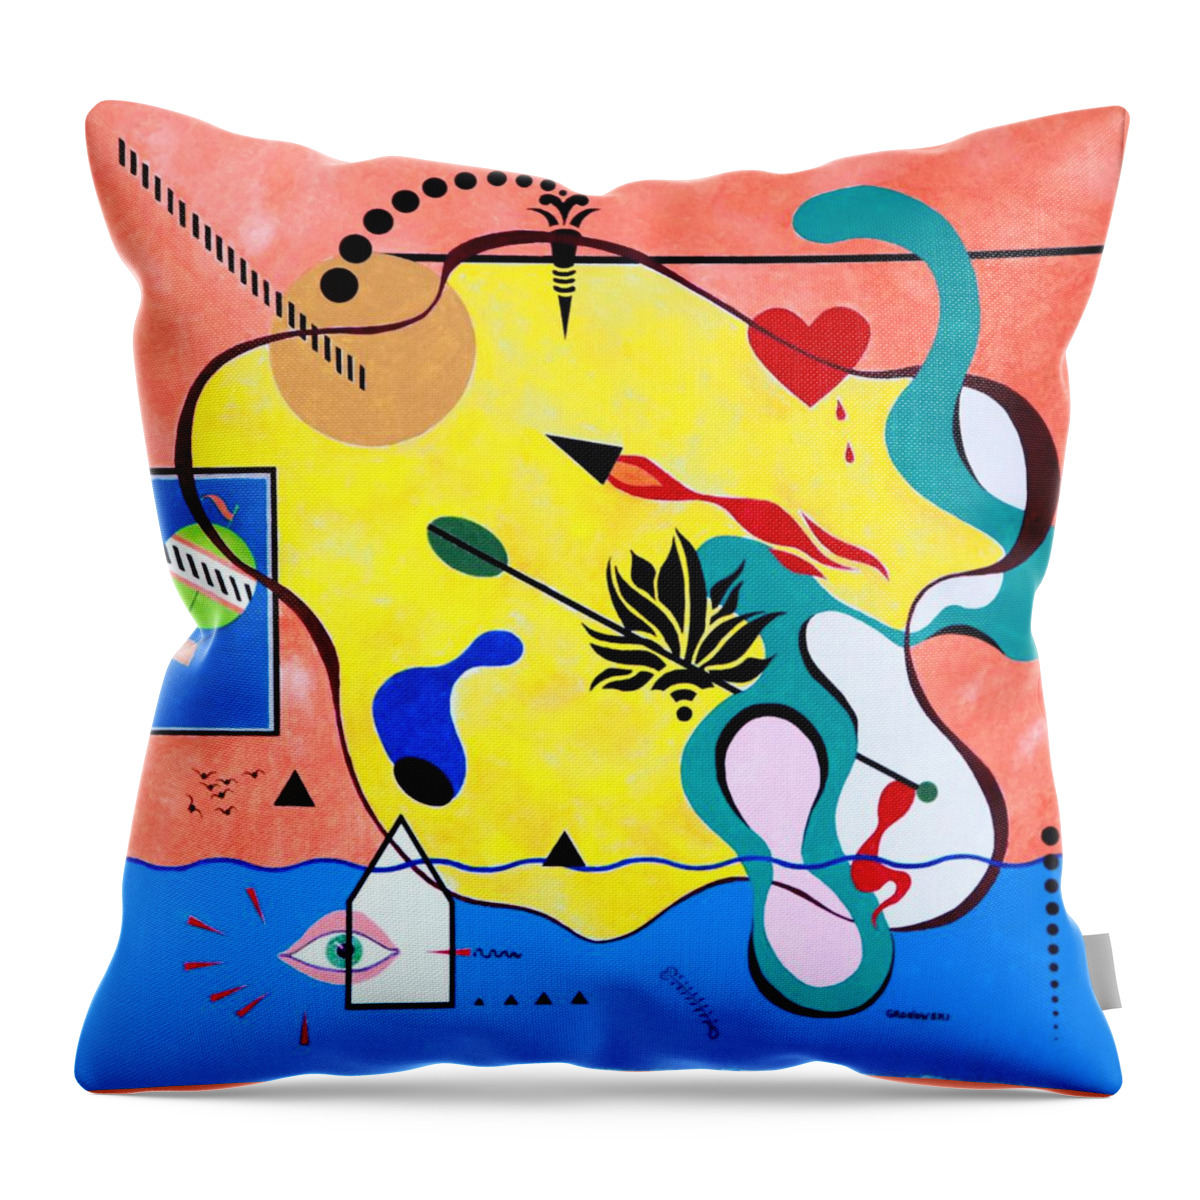 Bright Colors Throw Pillow featuring the painting Miro Miro on the Wall by Thomas Gronowski